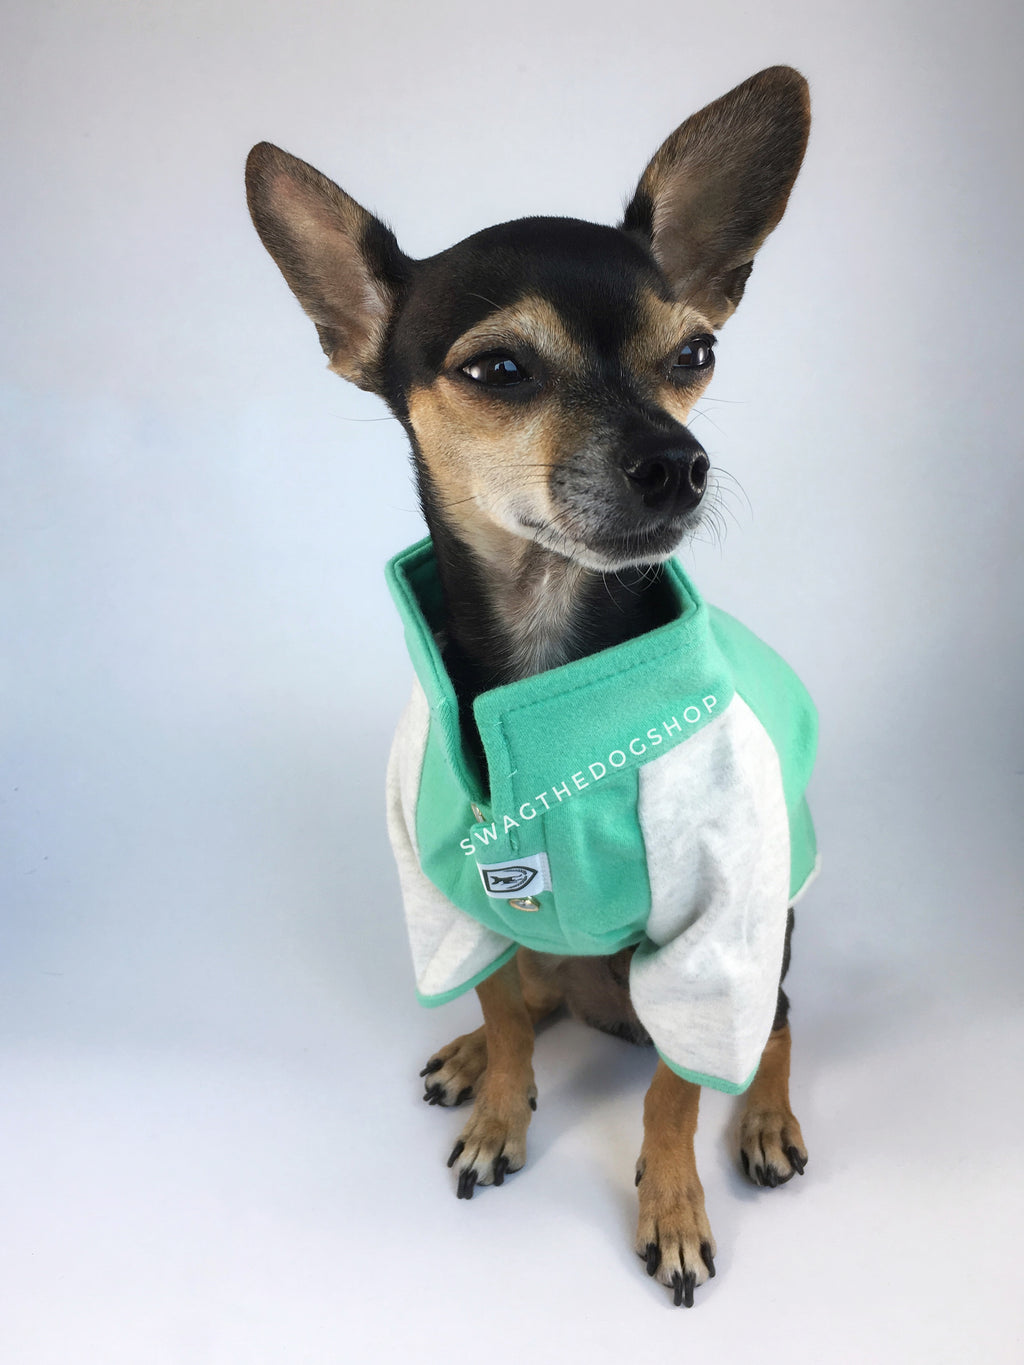 Surfside Emerald Green Polo Shirt - Full Front View of Cute Chihuahua Dog Wearing Shirt. Emerald Green with Light Gray Sleeves Polo Shirt